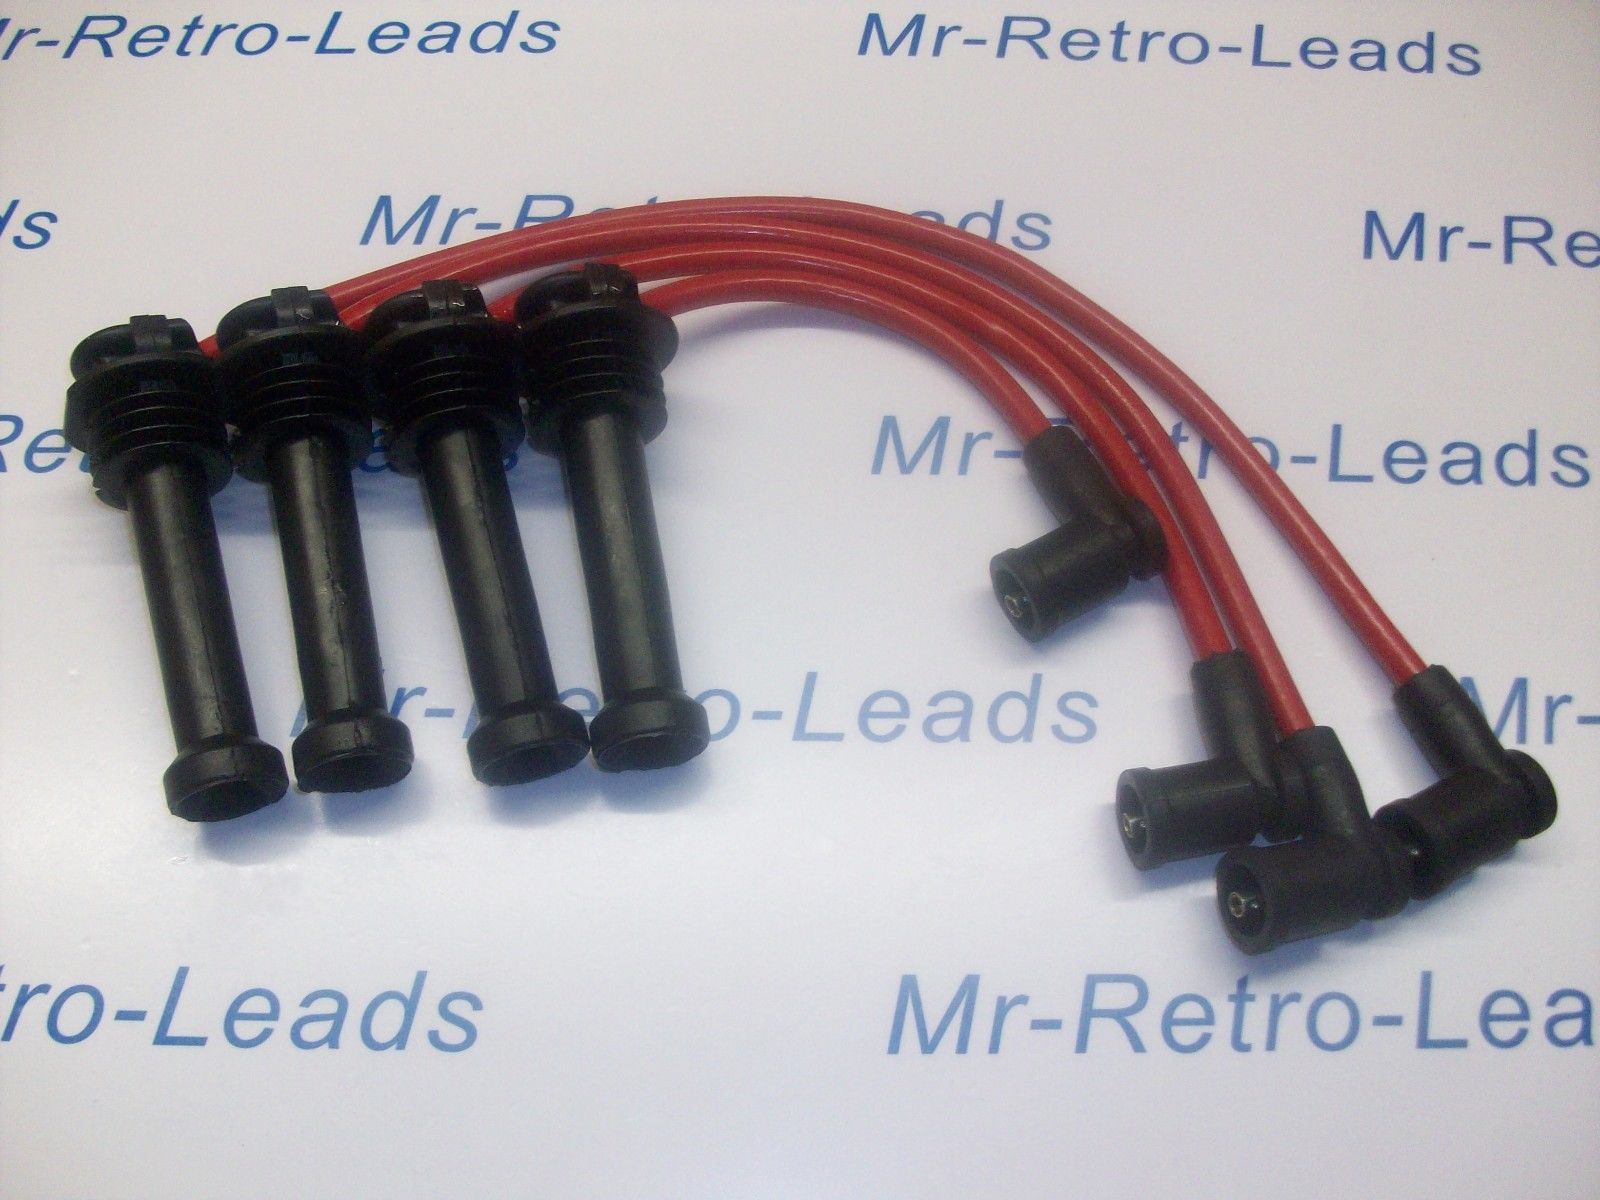 Red 8mm Performance Ignition Leads For Mazda Tribute Suv Quality Built Leads